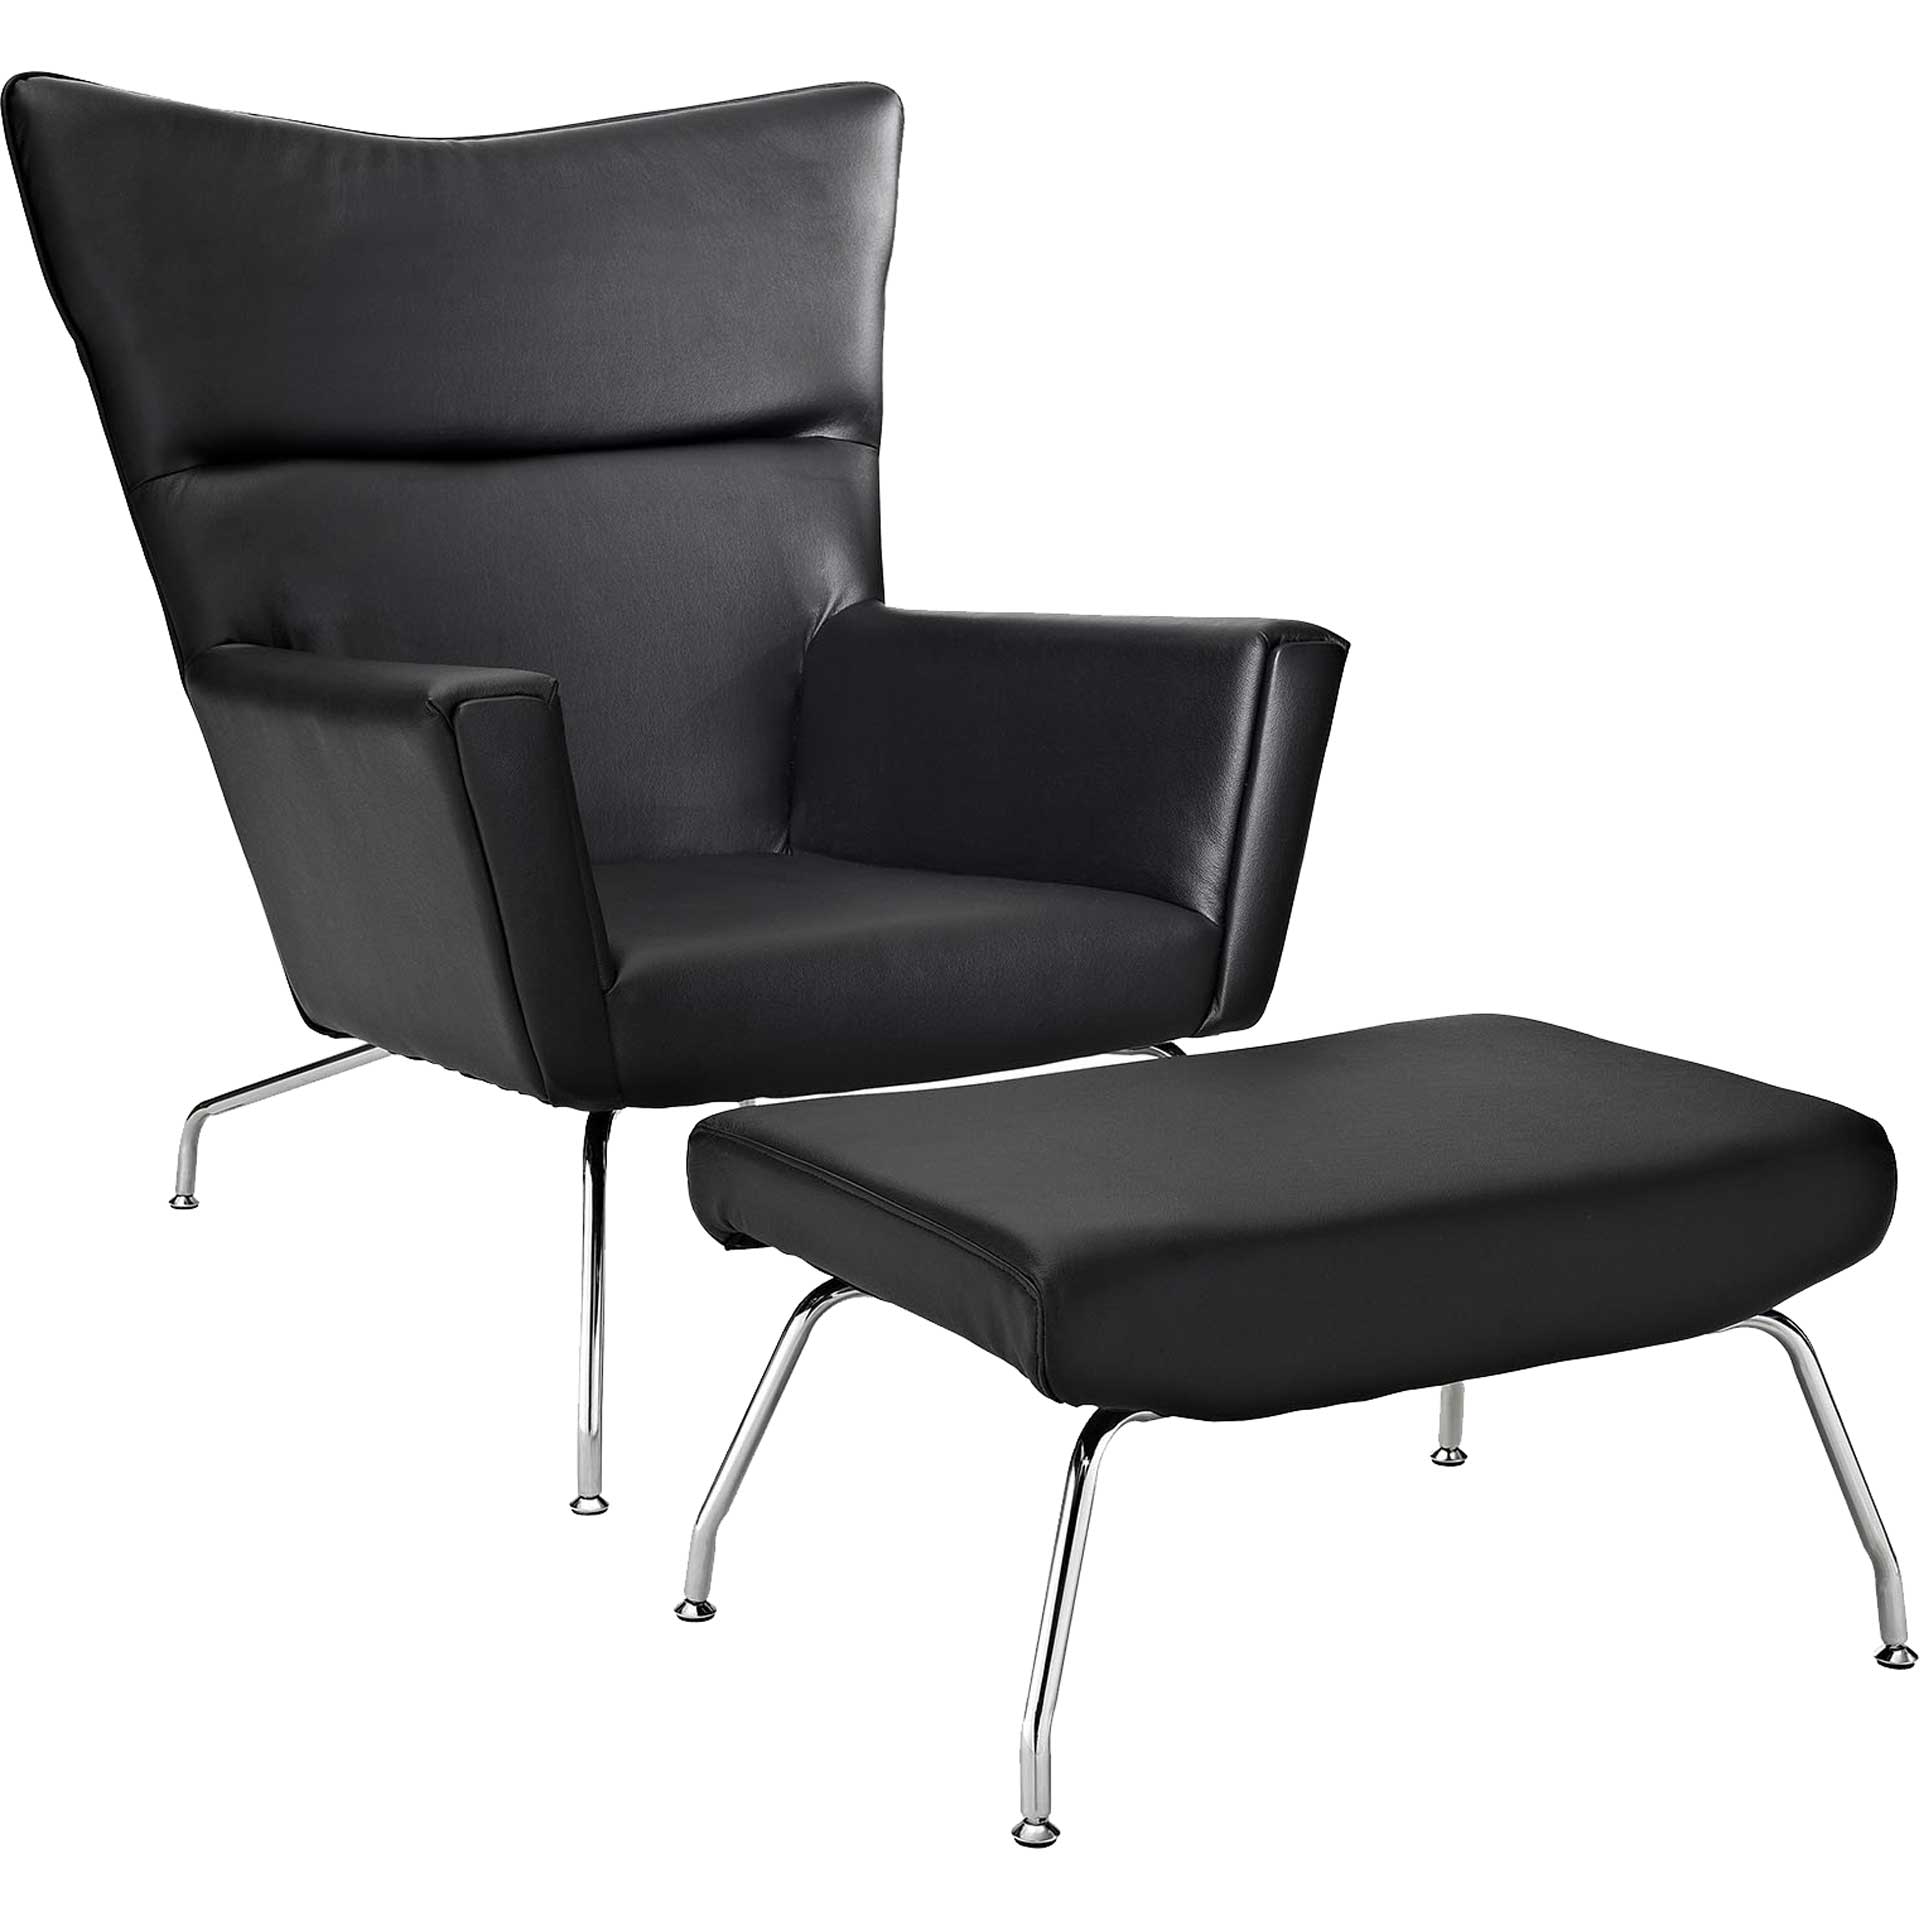 Clarell Leather Lounge Chair Black